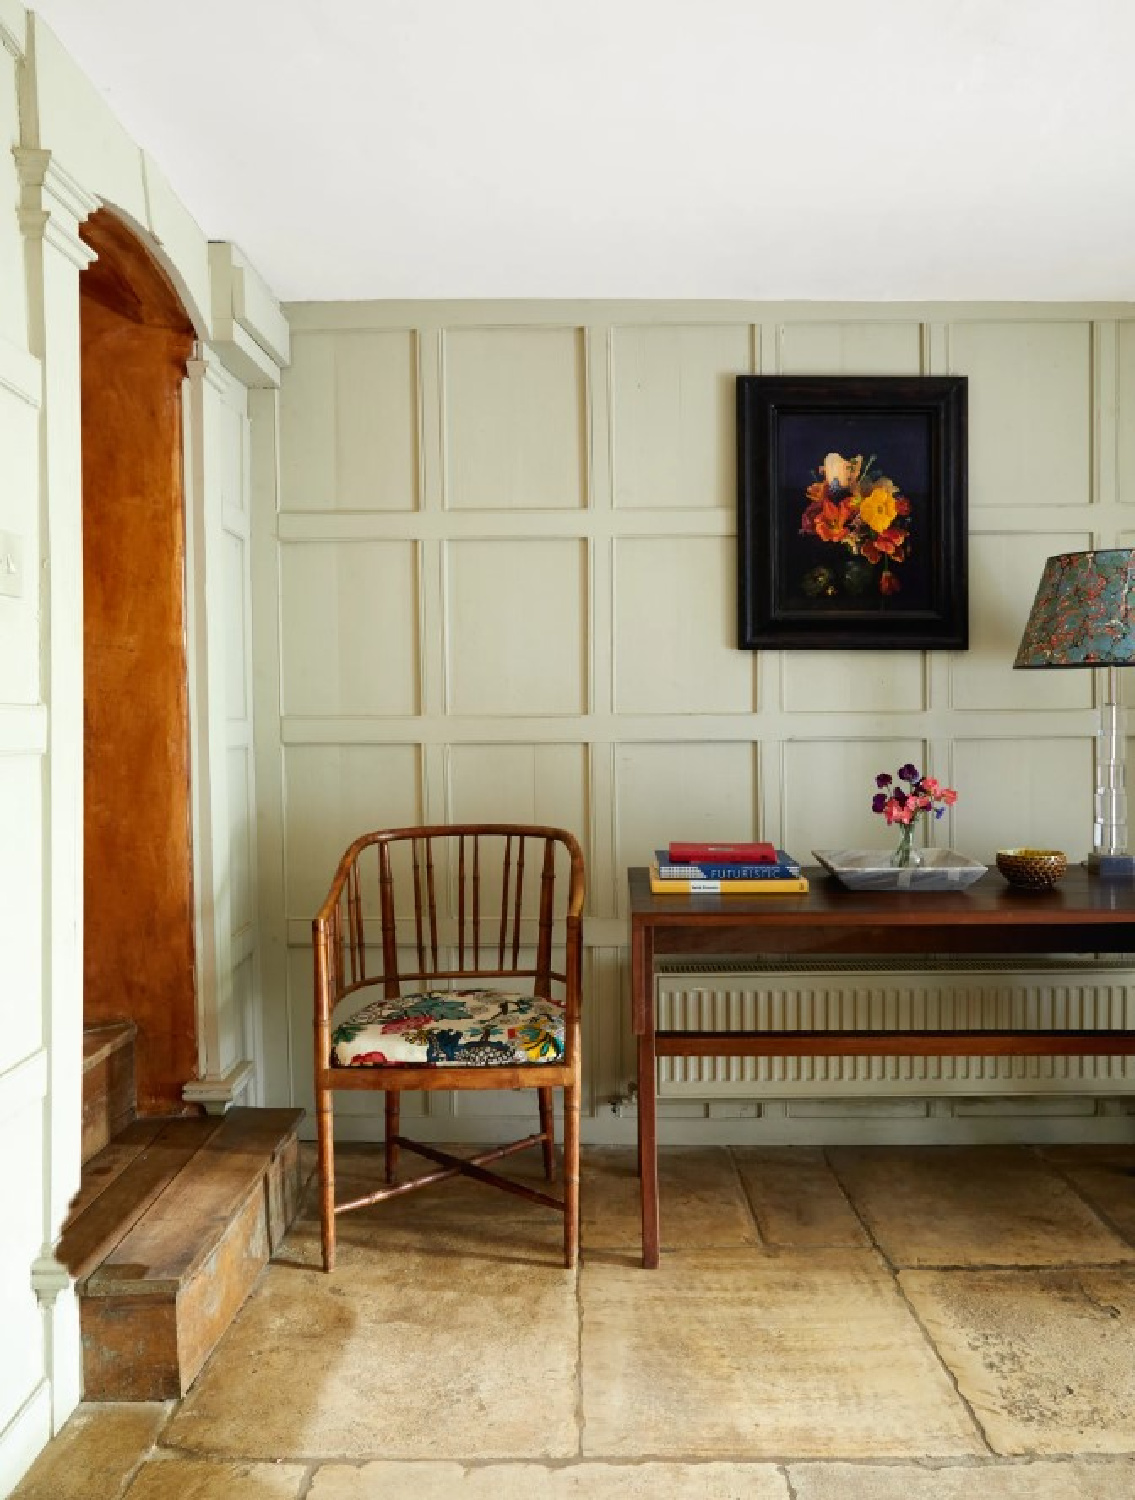 Paneled wall at Cotswold home of Renshaw and Sarah Hiscox in HouseandGardenUK (photo Paul Massey). #cotswoldcottage #englishcountrystyle